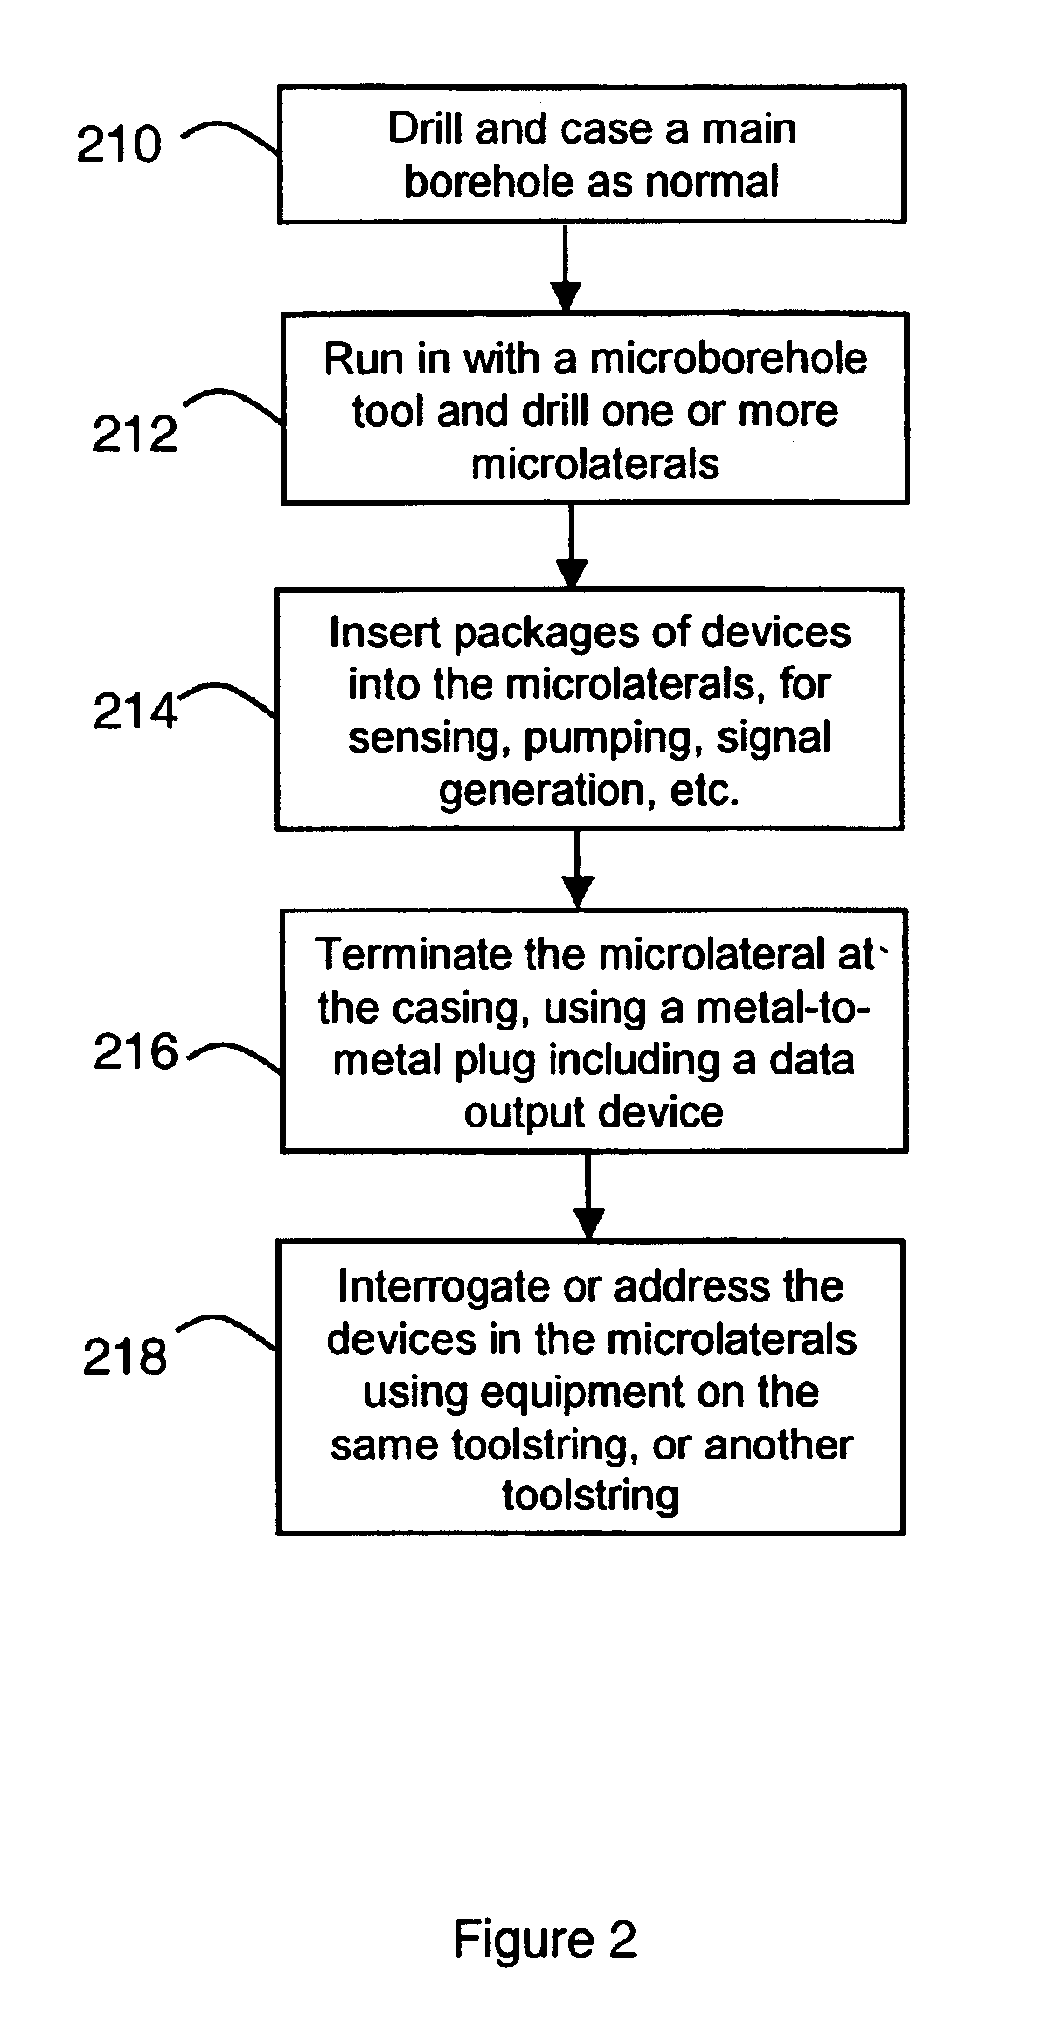 System and method for installation and use of devices in microboreholes